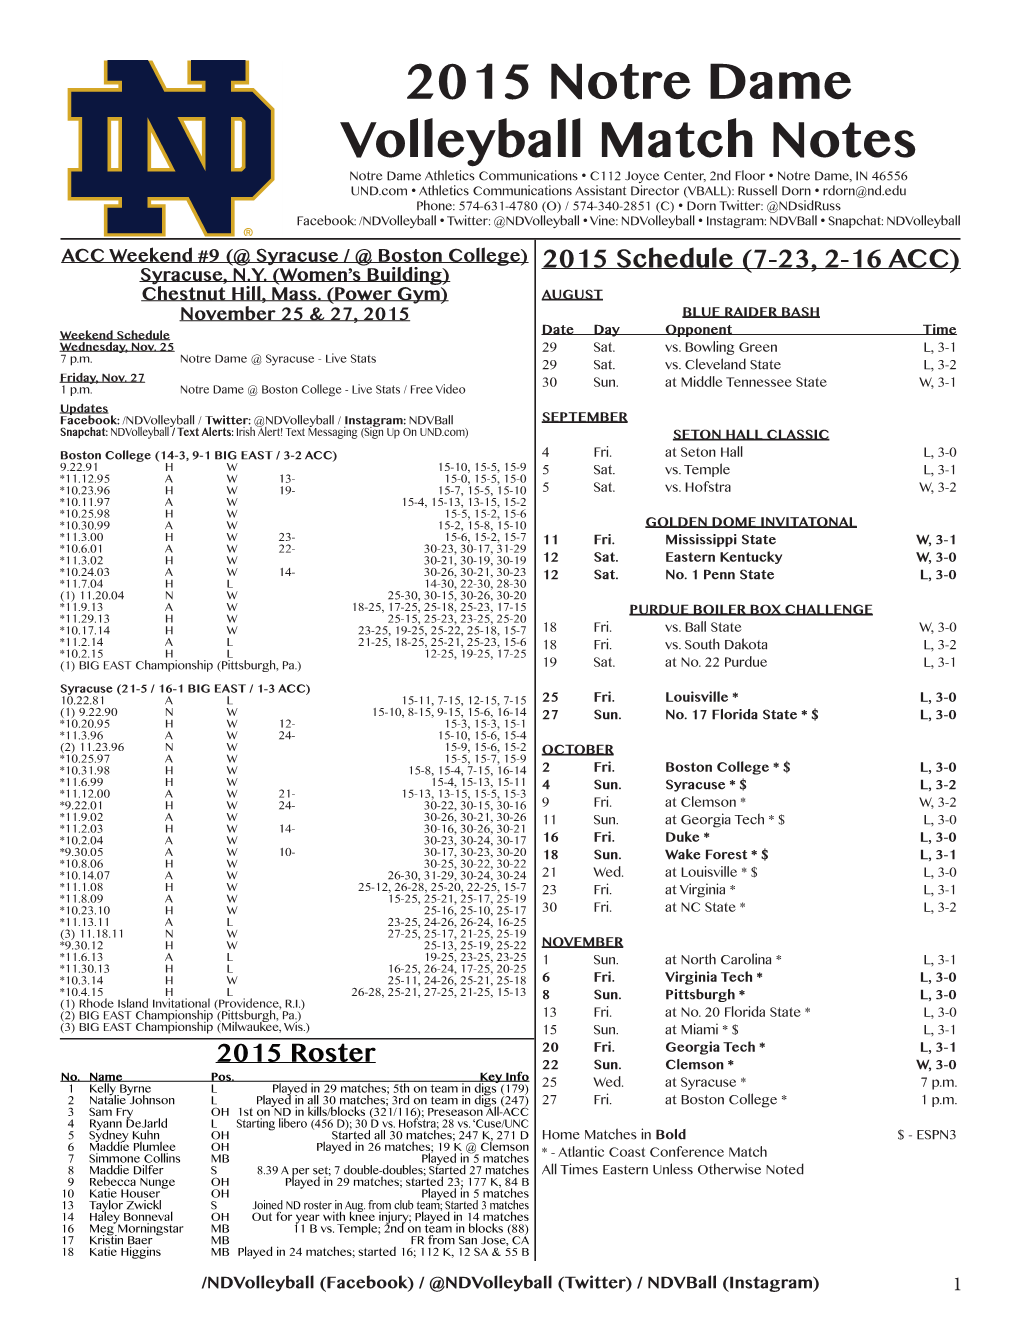 2015 Notre Dame Volleyball Match Notes